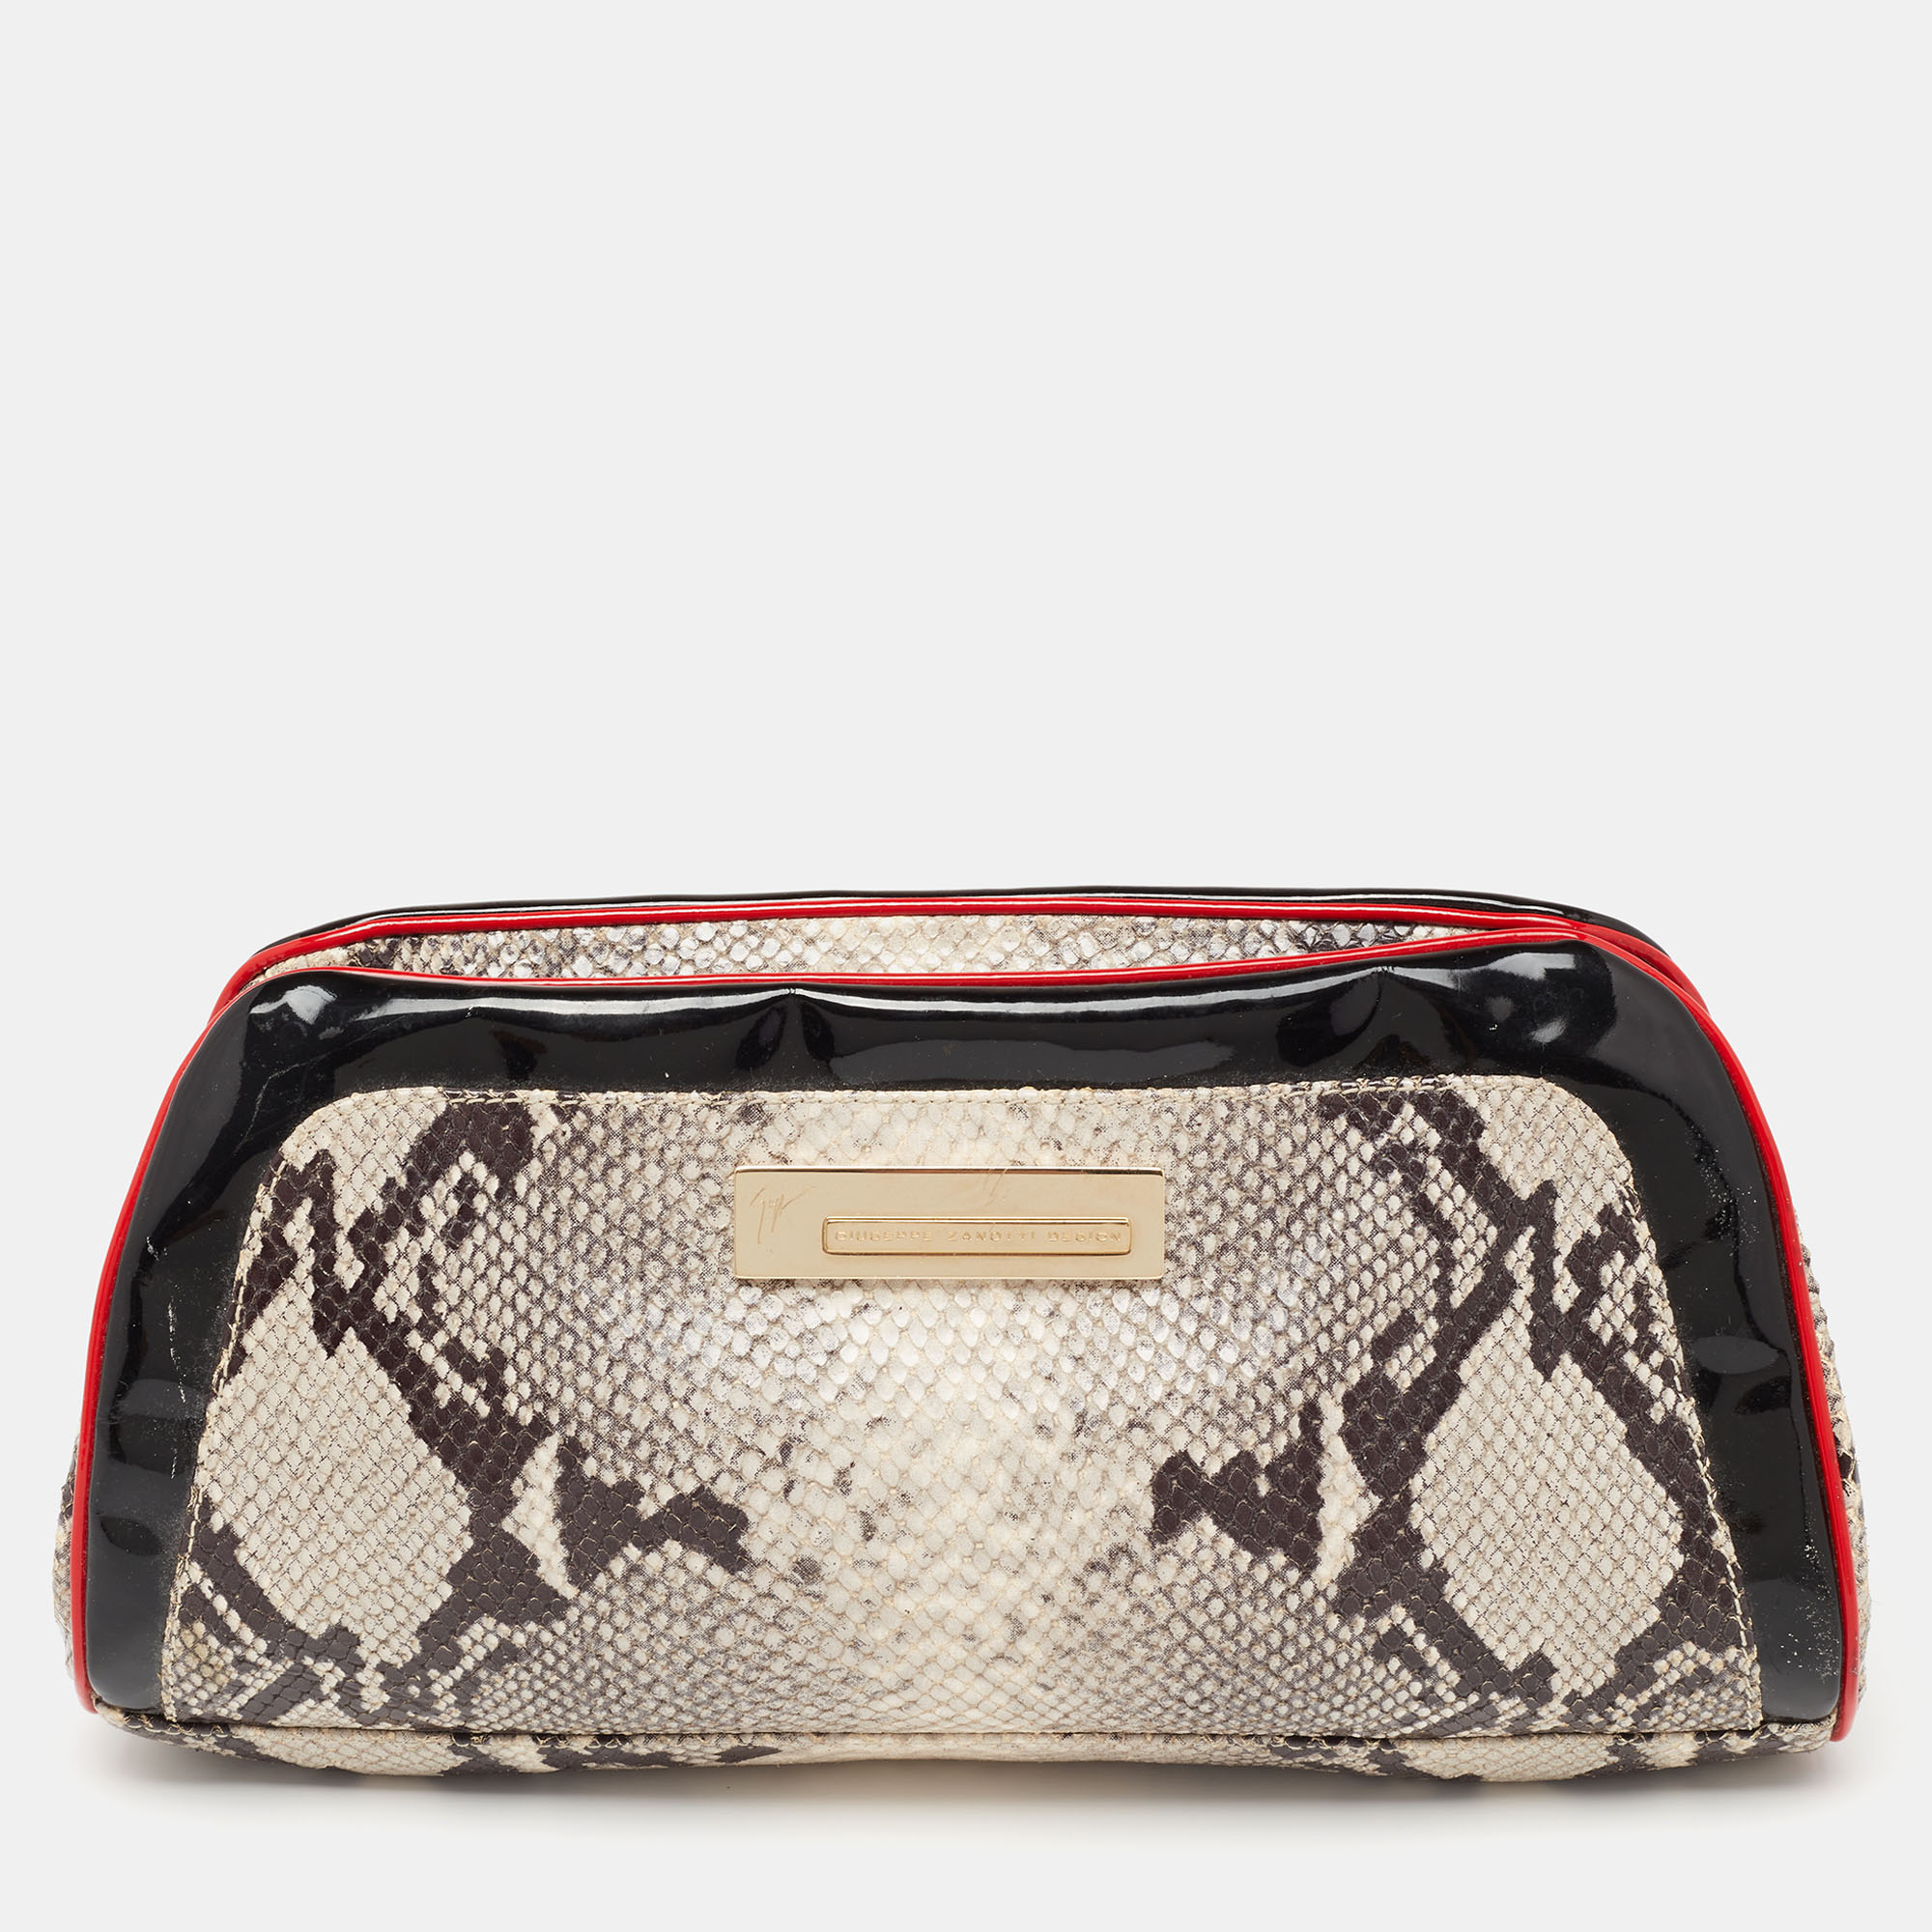 Giuseppe zanotti multicolour python embossed and patent leather clutch